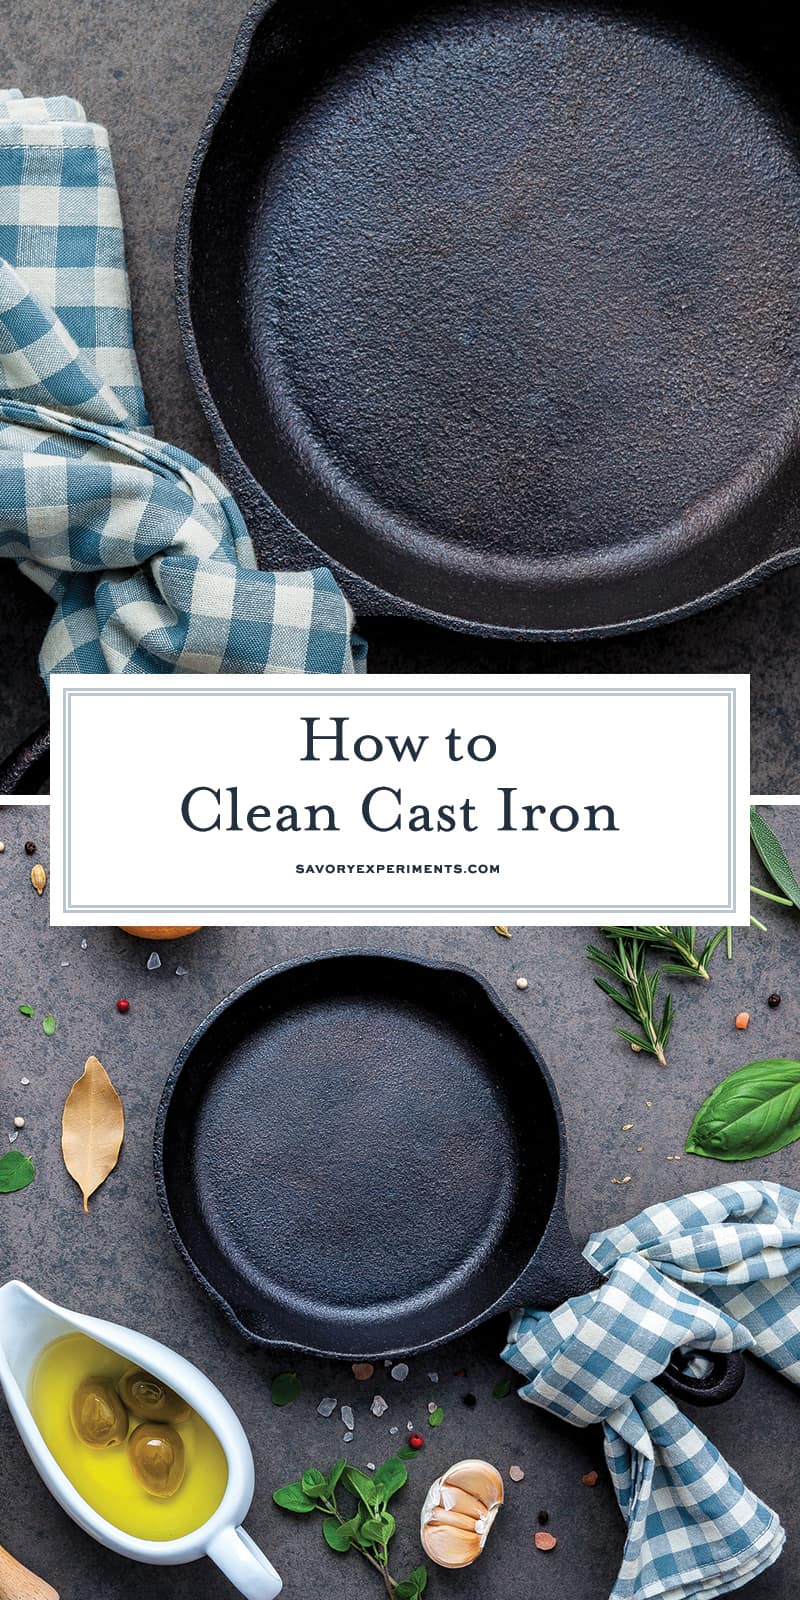 How to clean cast iron cookware in easy steps, plus how to care for and maintain cast iron to make the most of your seasoning and prevent rust! #howtocleancastiron #howtoremoverustfromcastiron www.savoryexperiments.com 